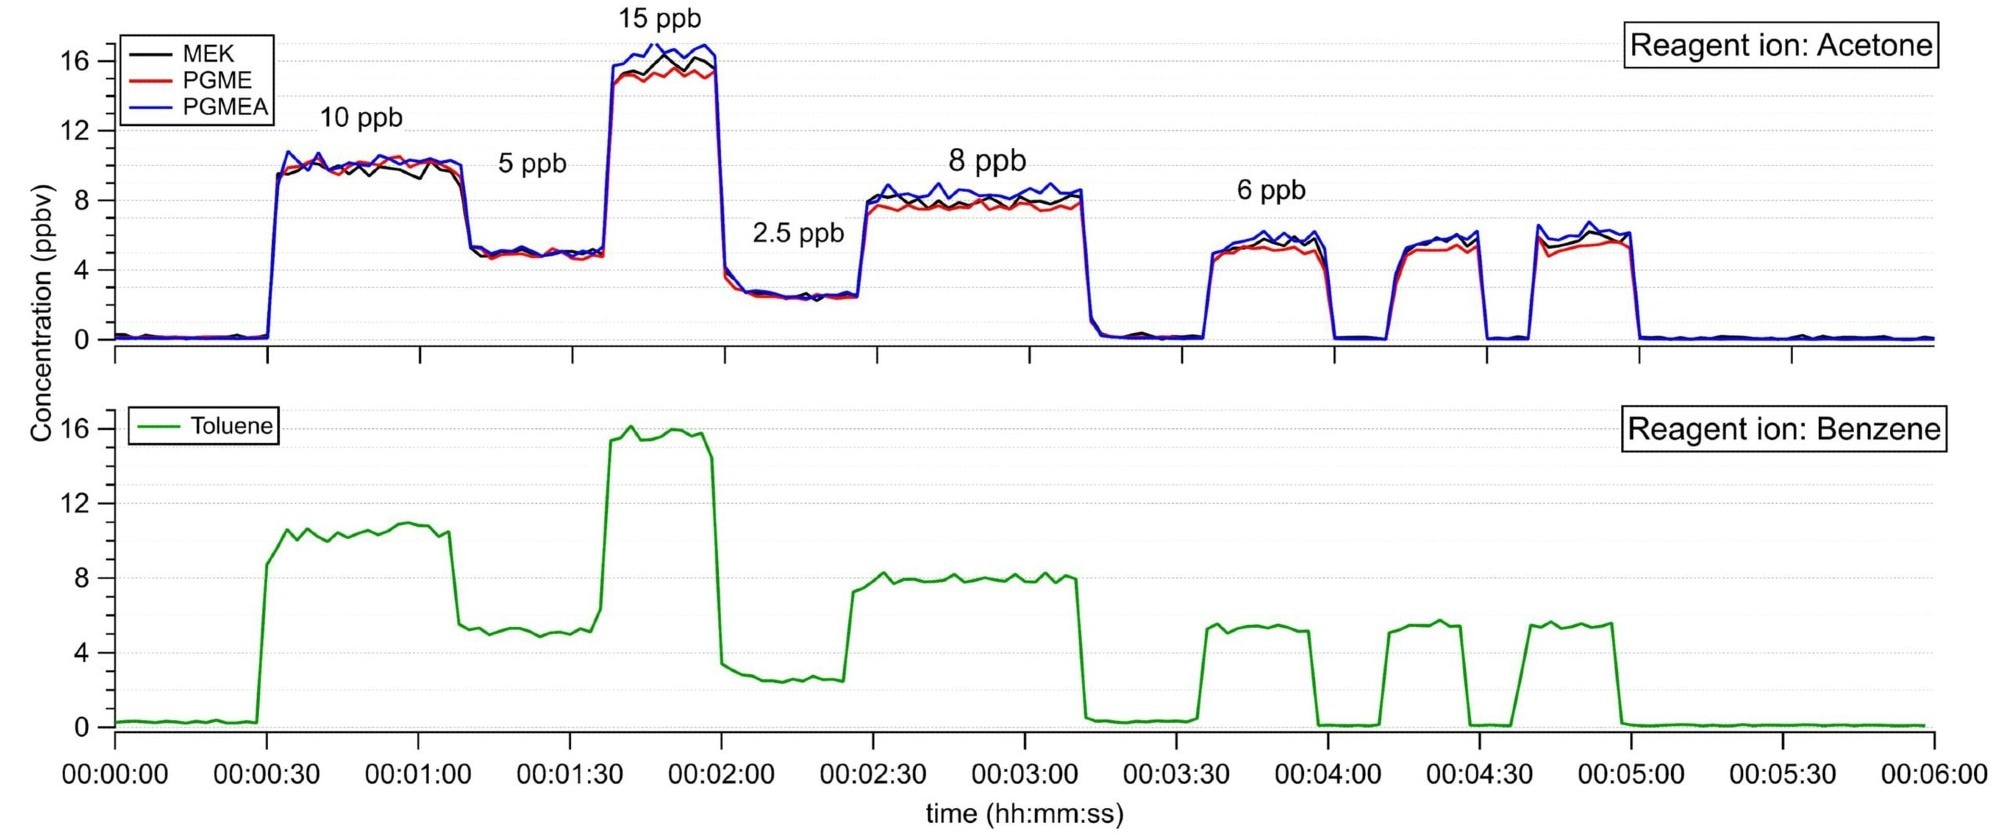 Response and recovery time of a ClearFab AMC Monitor. Labels in the plot show target concentrations while the Y-axis shows the measured concentration of selected compounds. The upper plot shows the concentration of MEK, PGME, and PGMEA measured with one chemical ionization chemistry, while the lower plot shows the simultaneous measurement of toluene with another chemical ionization channel chemistry.